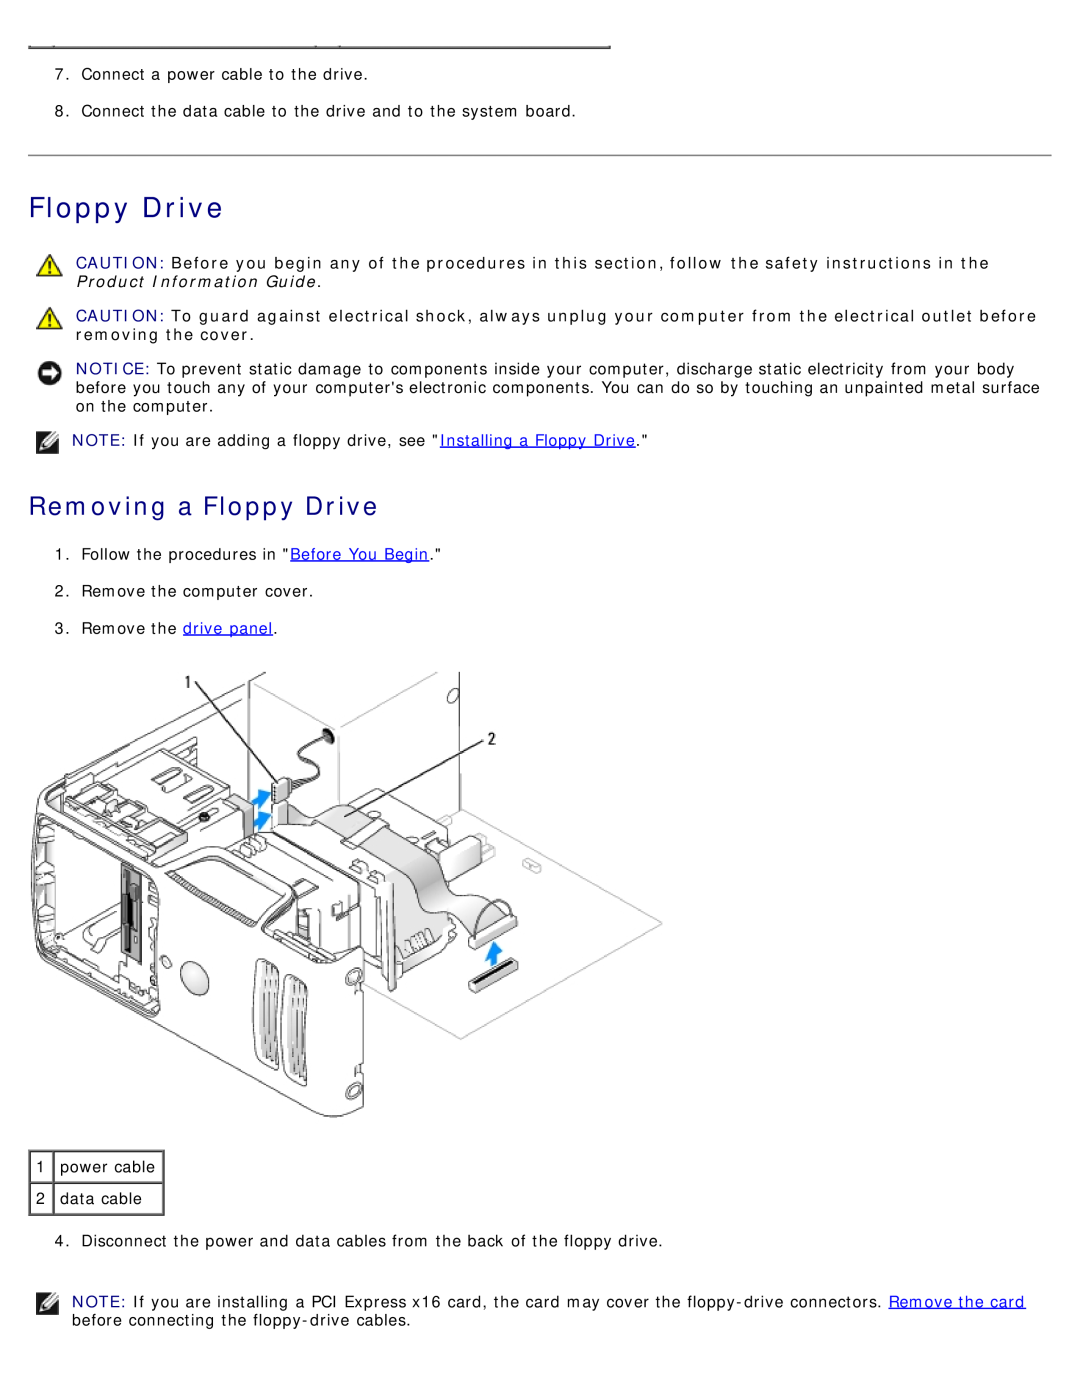 Dell DCSM manual Removing a Floppy Drive 